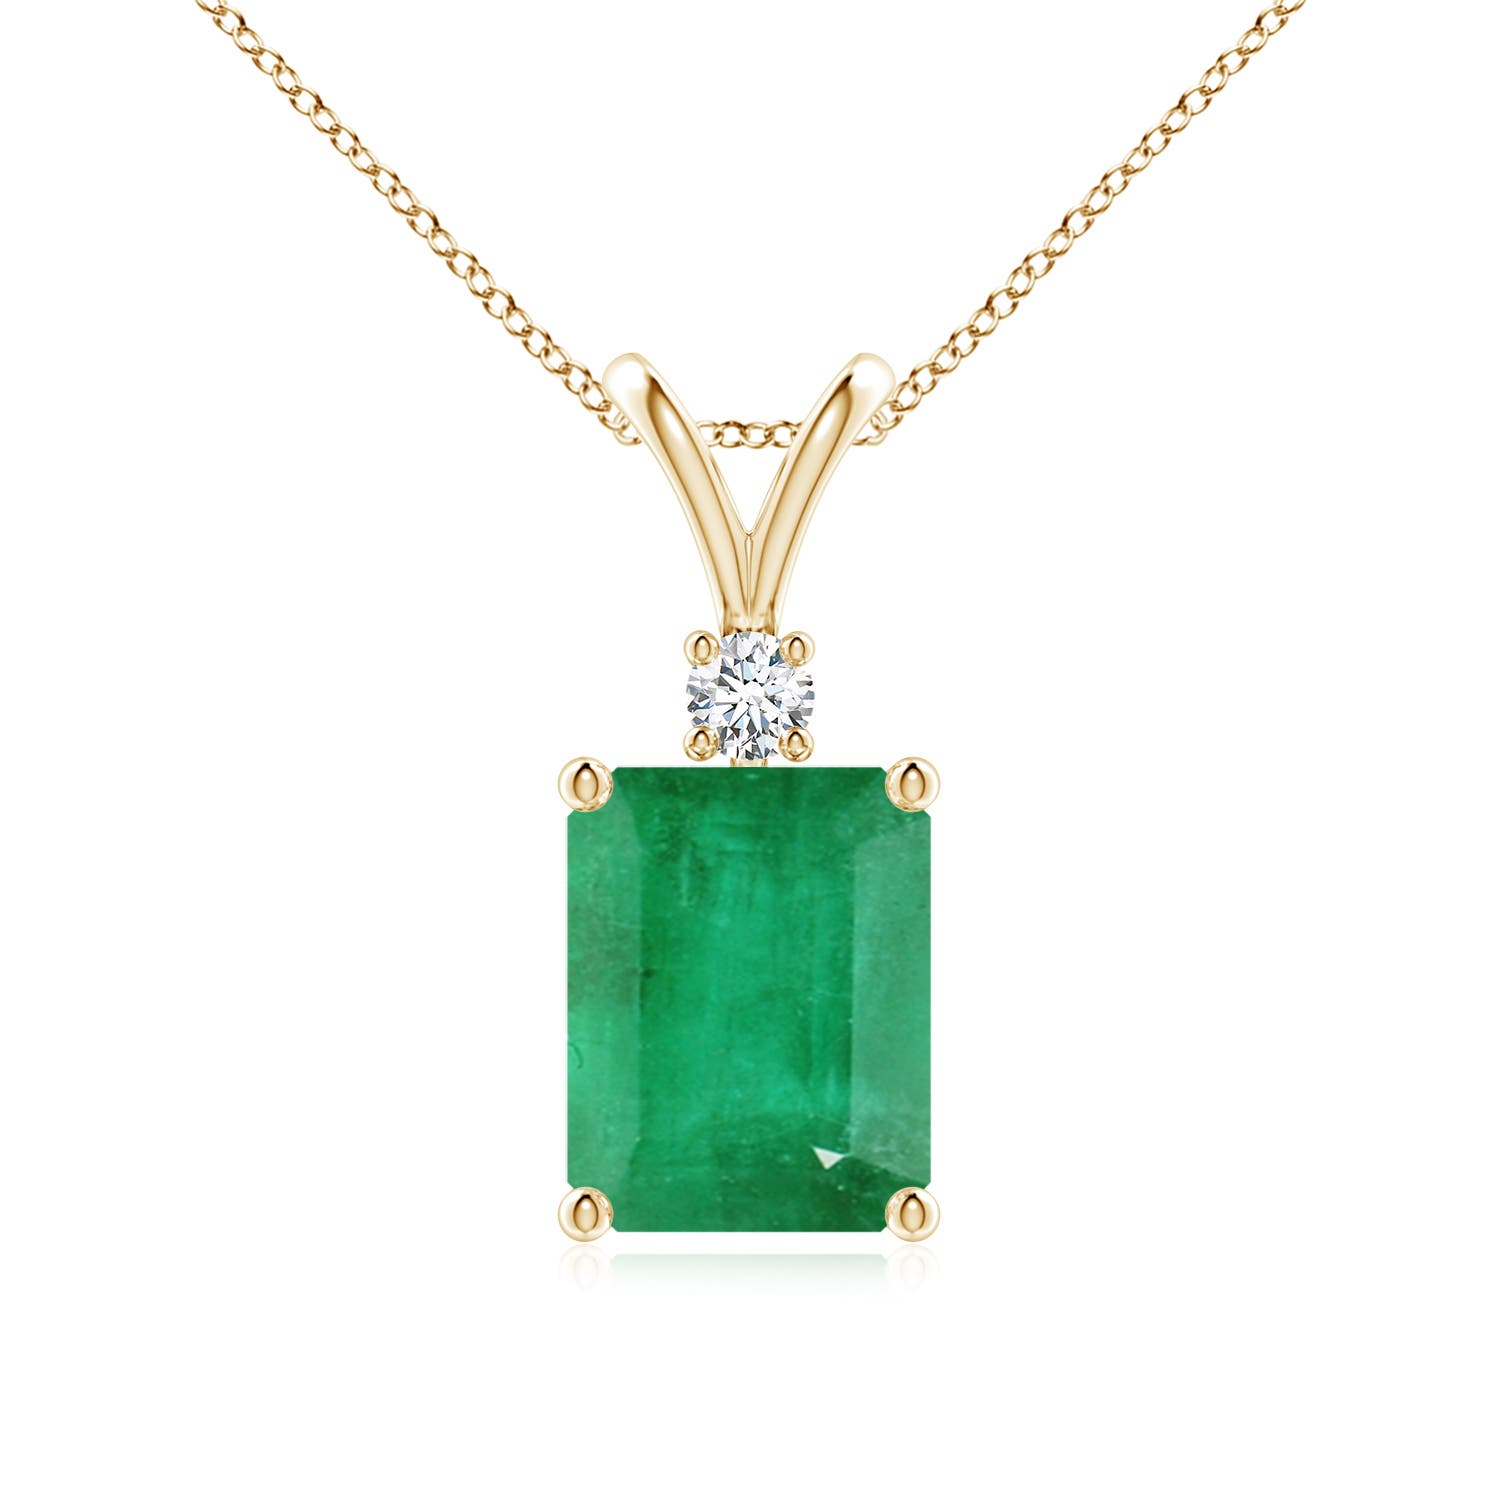 A - Emerald / 2.32 CT / 14 KT Yellow Gold